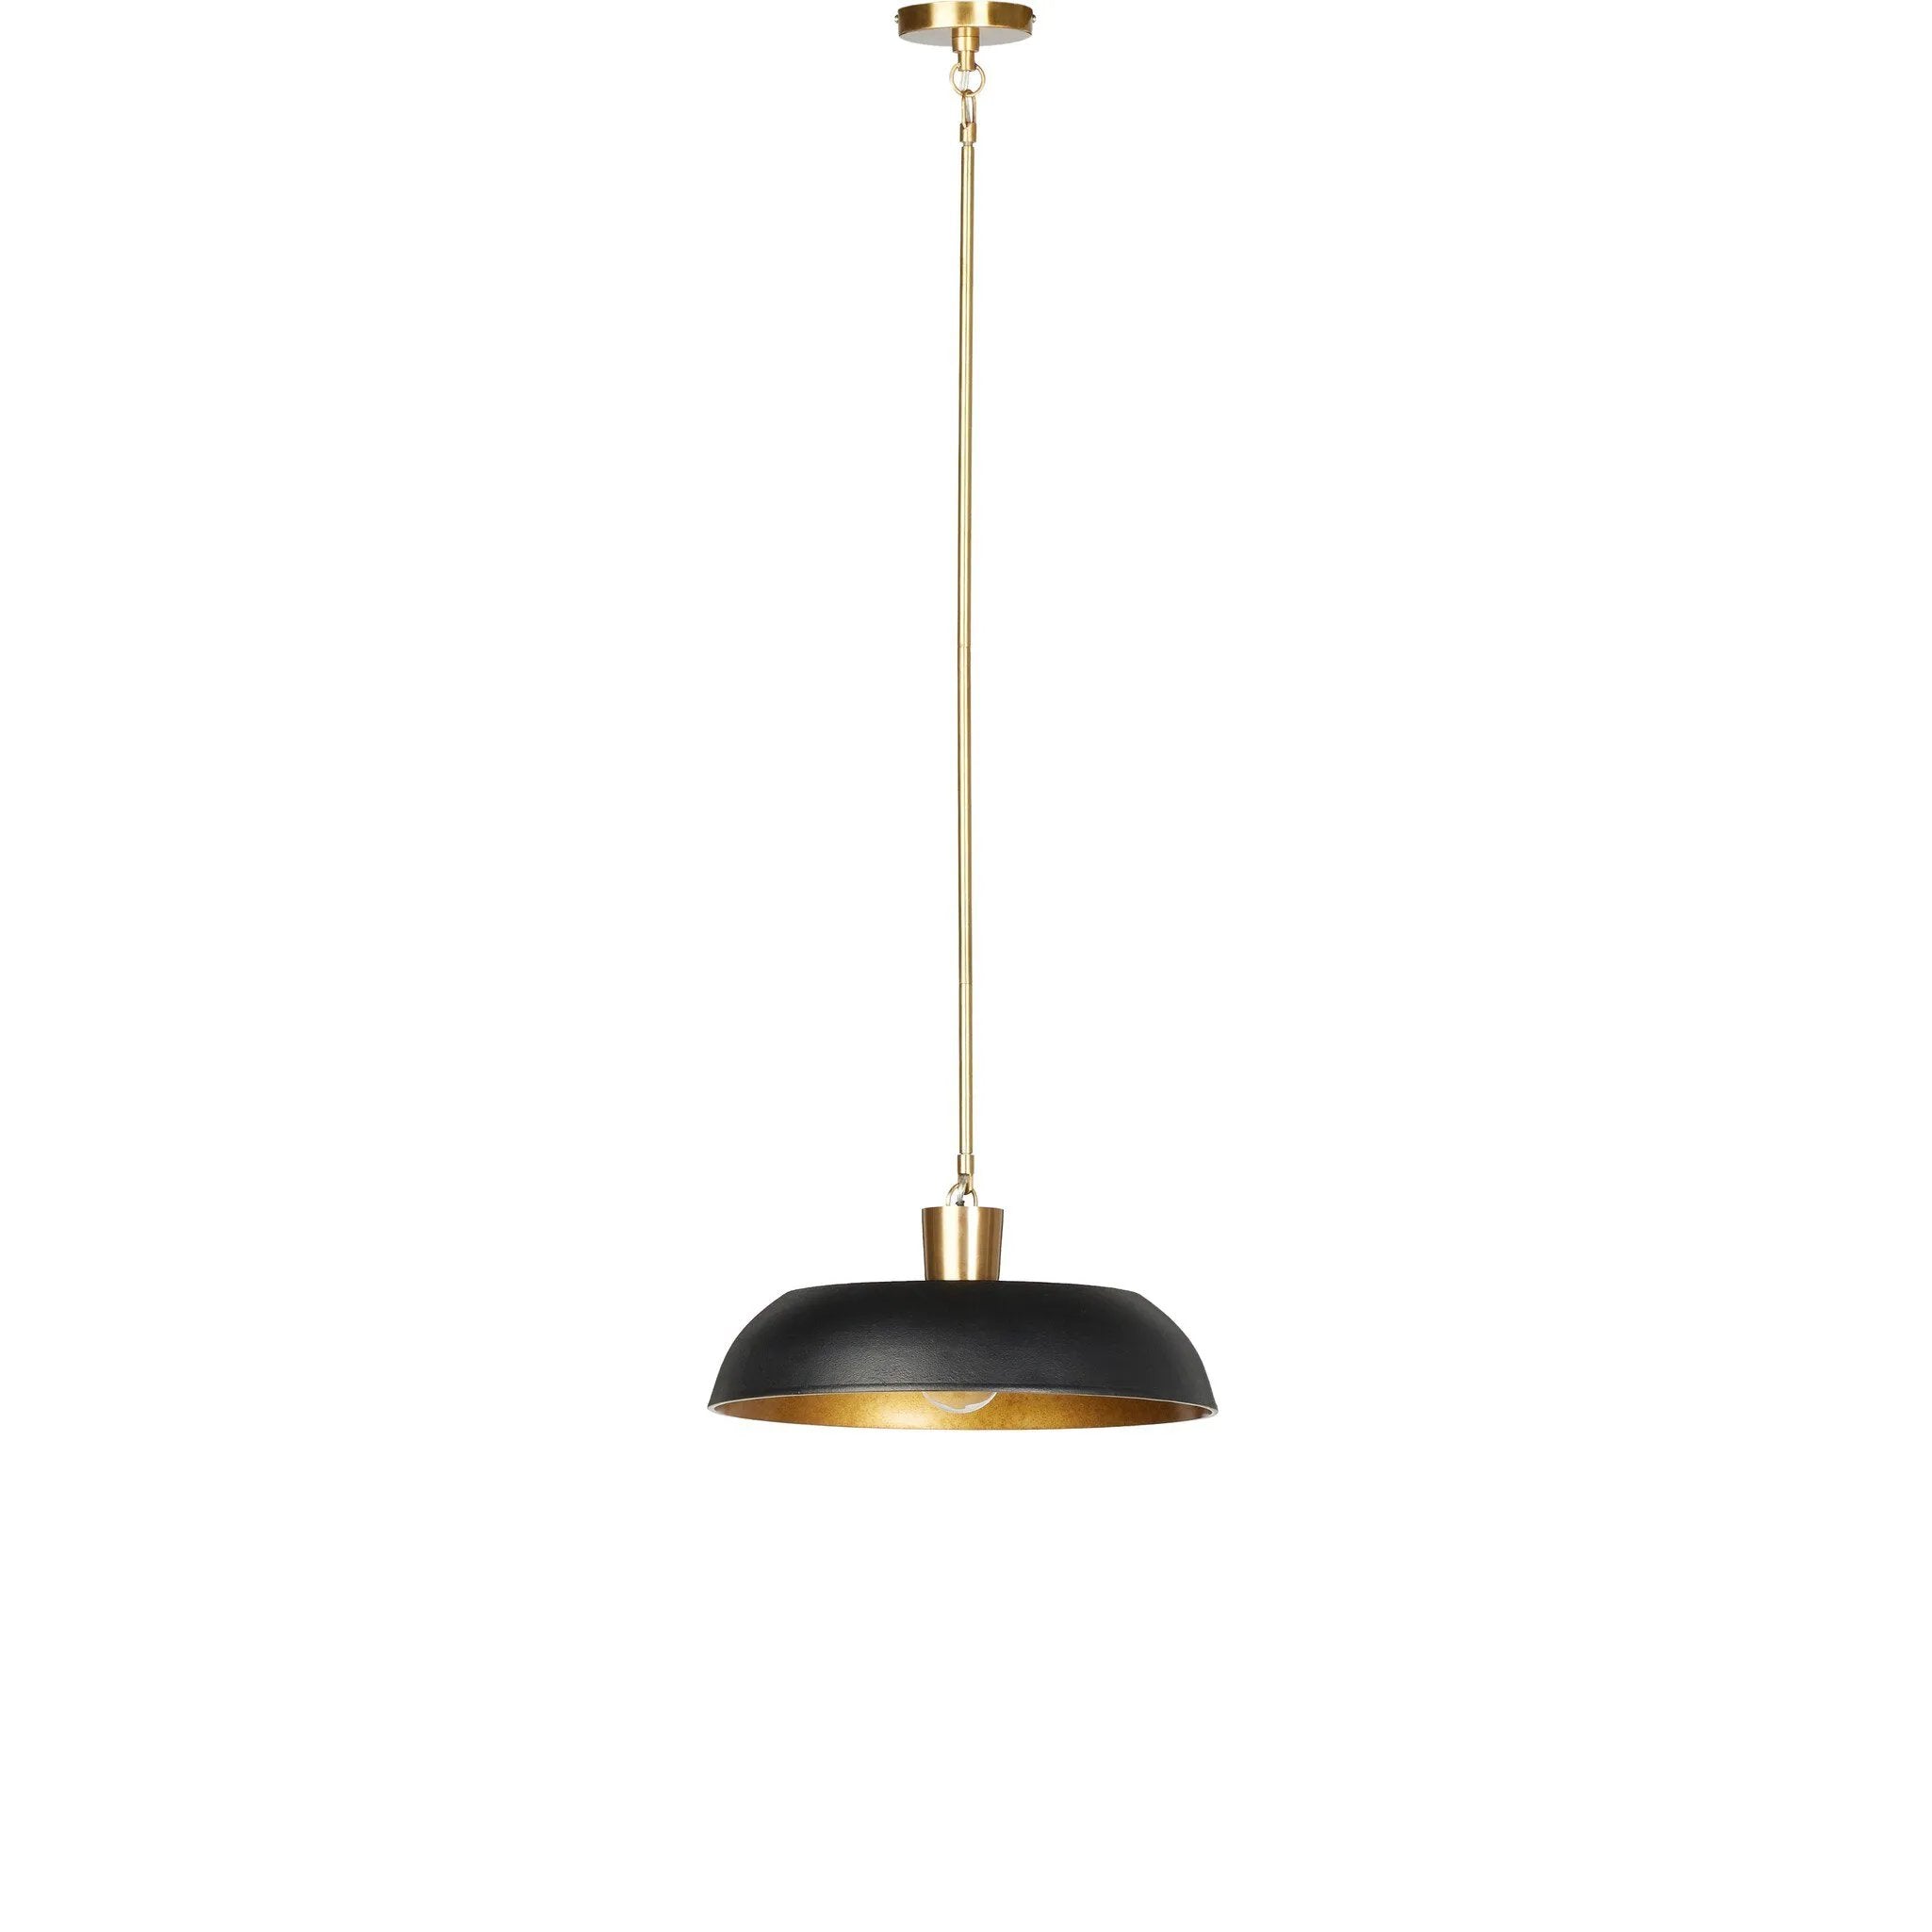 Low-profile pendant light with wide cast aluminum shade in a black textured finish. Gold leaf interior reflects to emit a warm, inviting glow that meets vintage inspiration and modern simplicity.Collection: Dan Amethyst Home provides interior design, new home construction design consulting, vintage area rugs, and lighting in the Park City metro area.